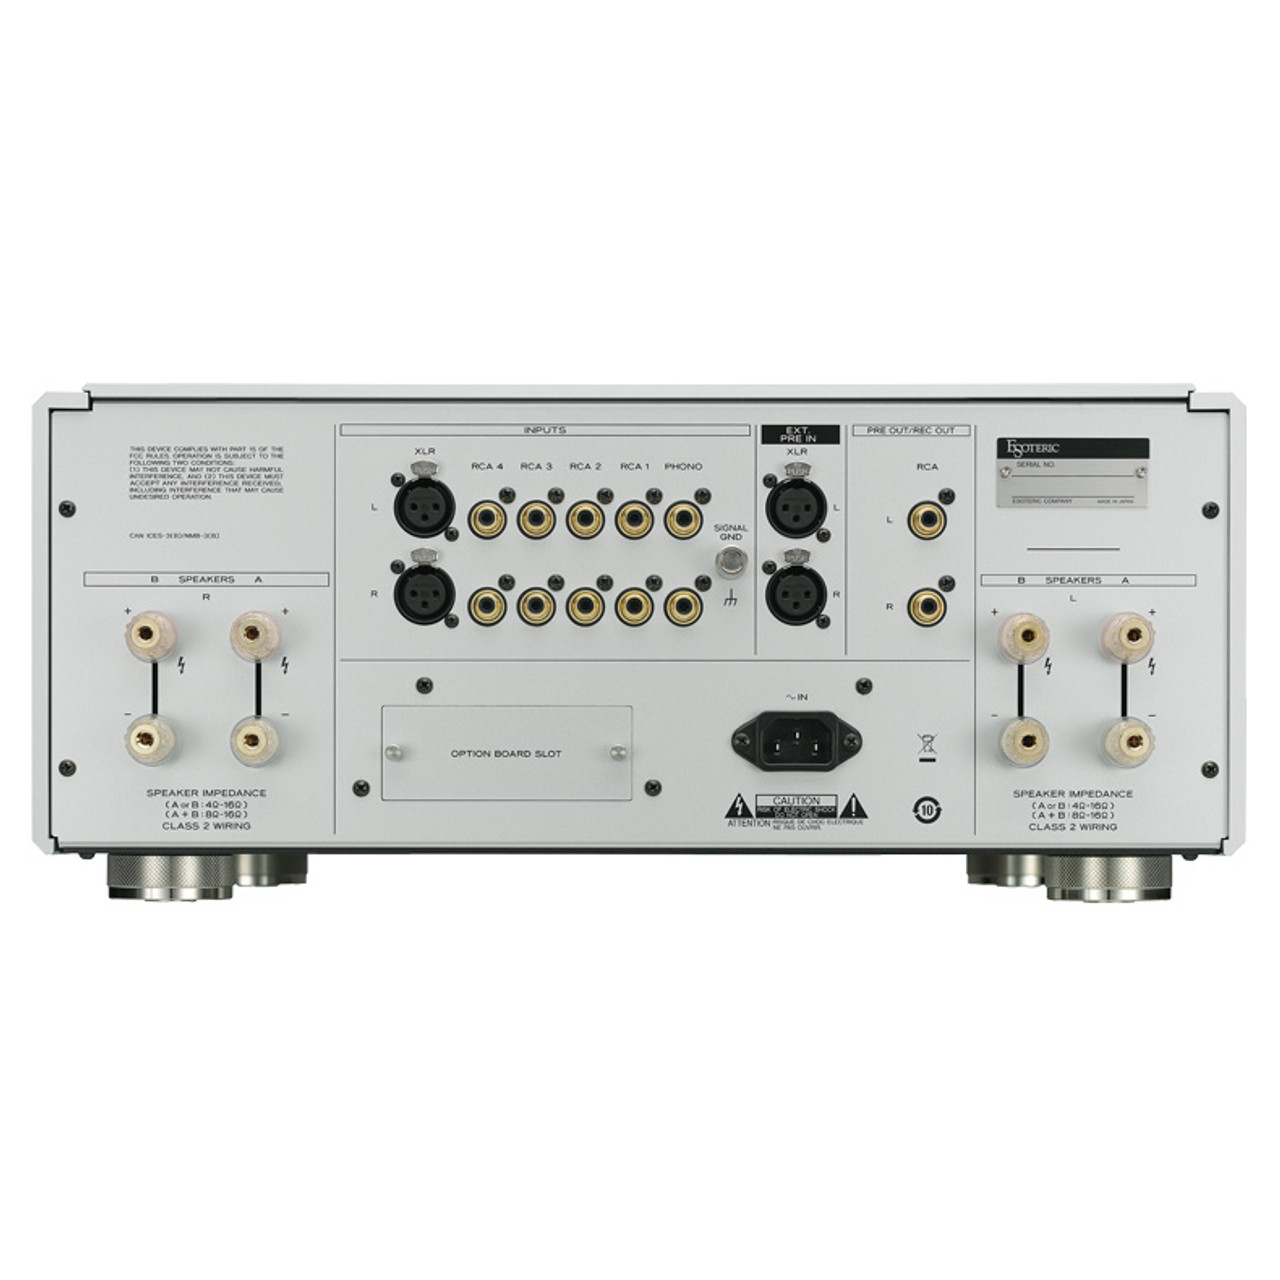 Esoteric F-07 integrated amplifier